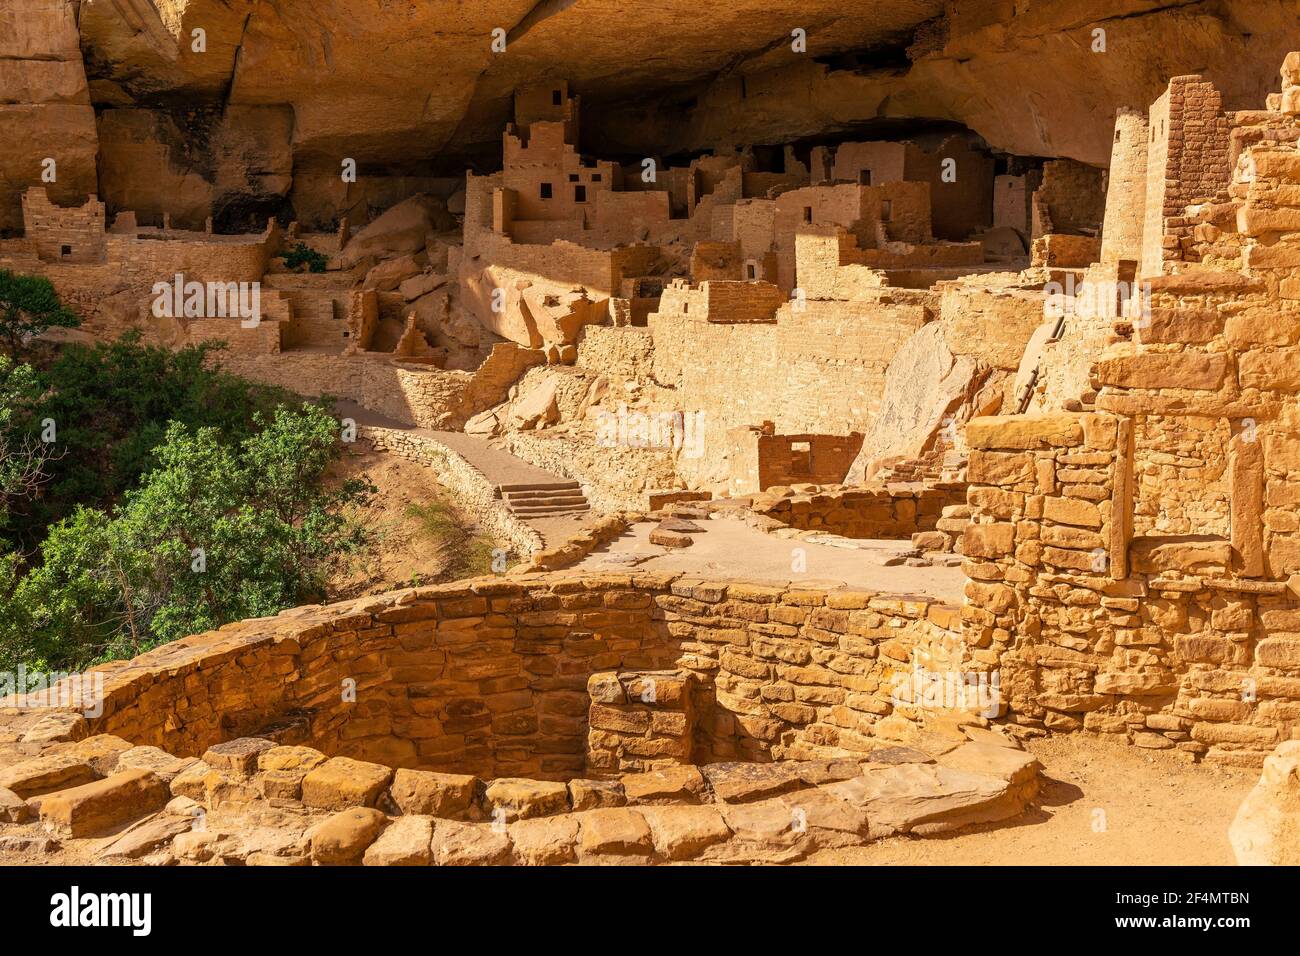 Cliff Palace cave dwelling, Mesa Verde national park, Colorado, United States of America (USA). Stock Photo